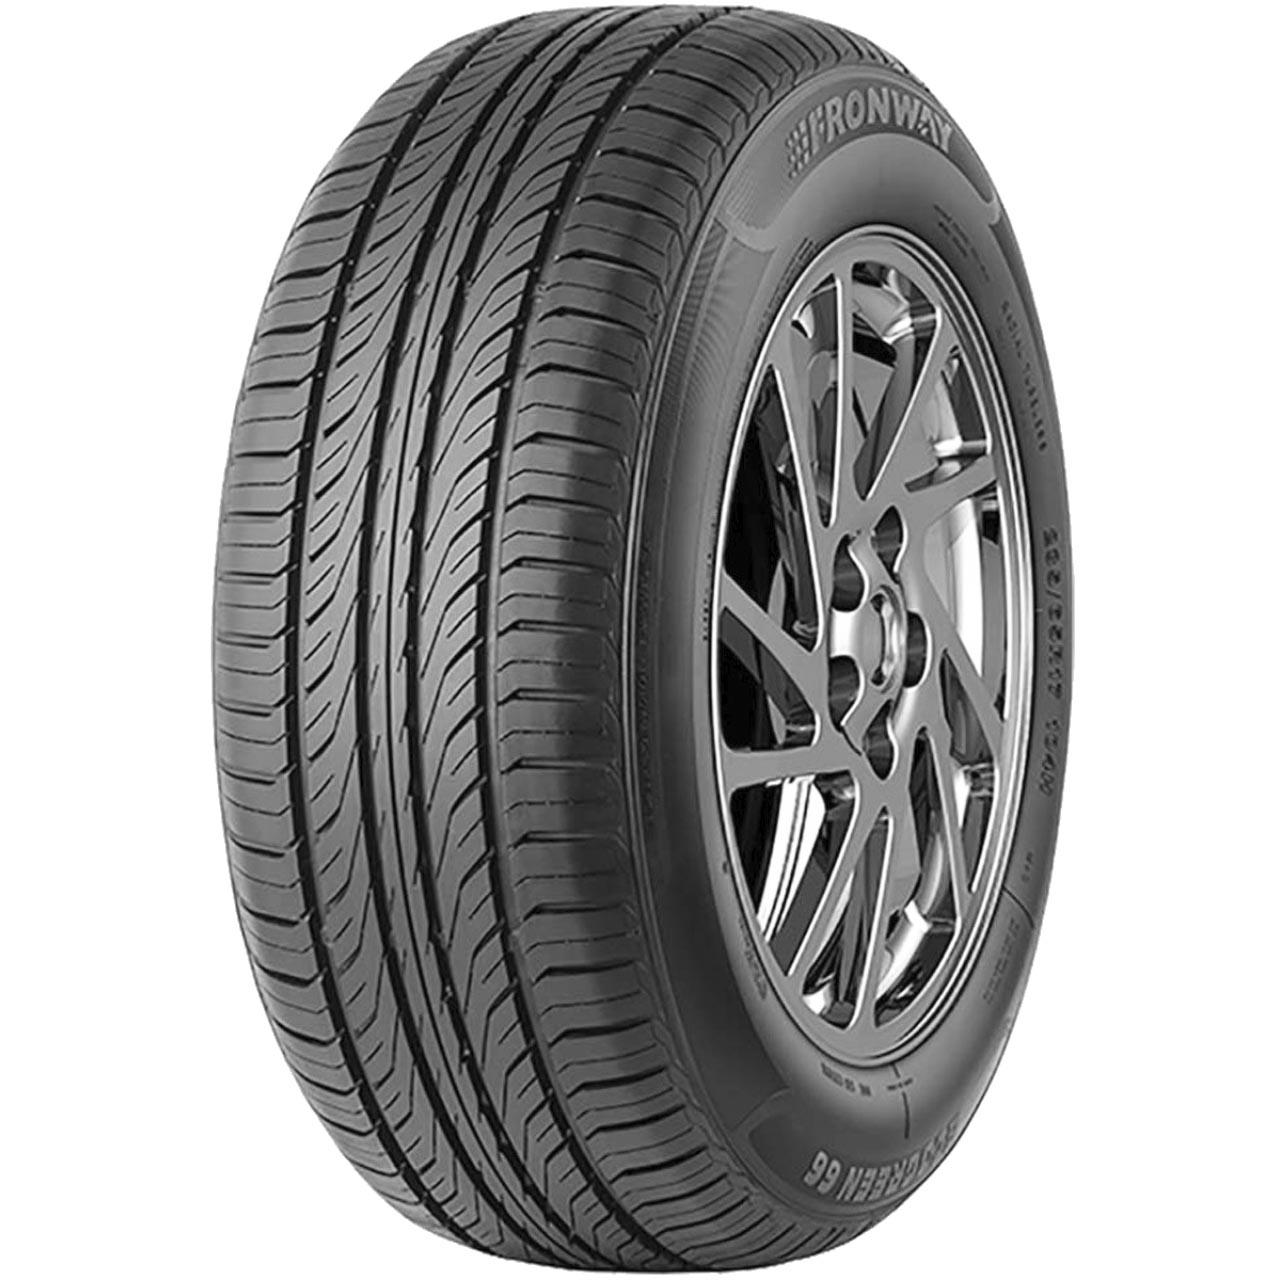 Fronway Ecogreen 66 145/65R15 72T